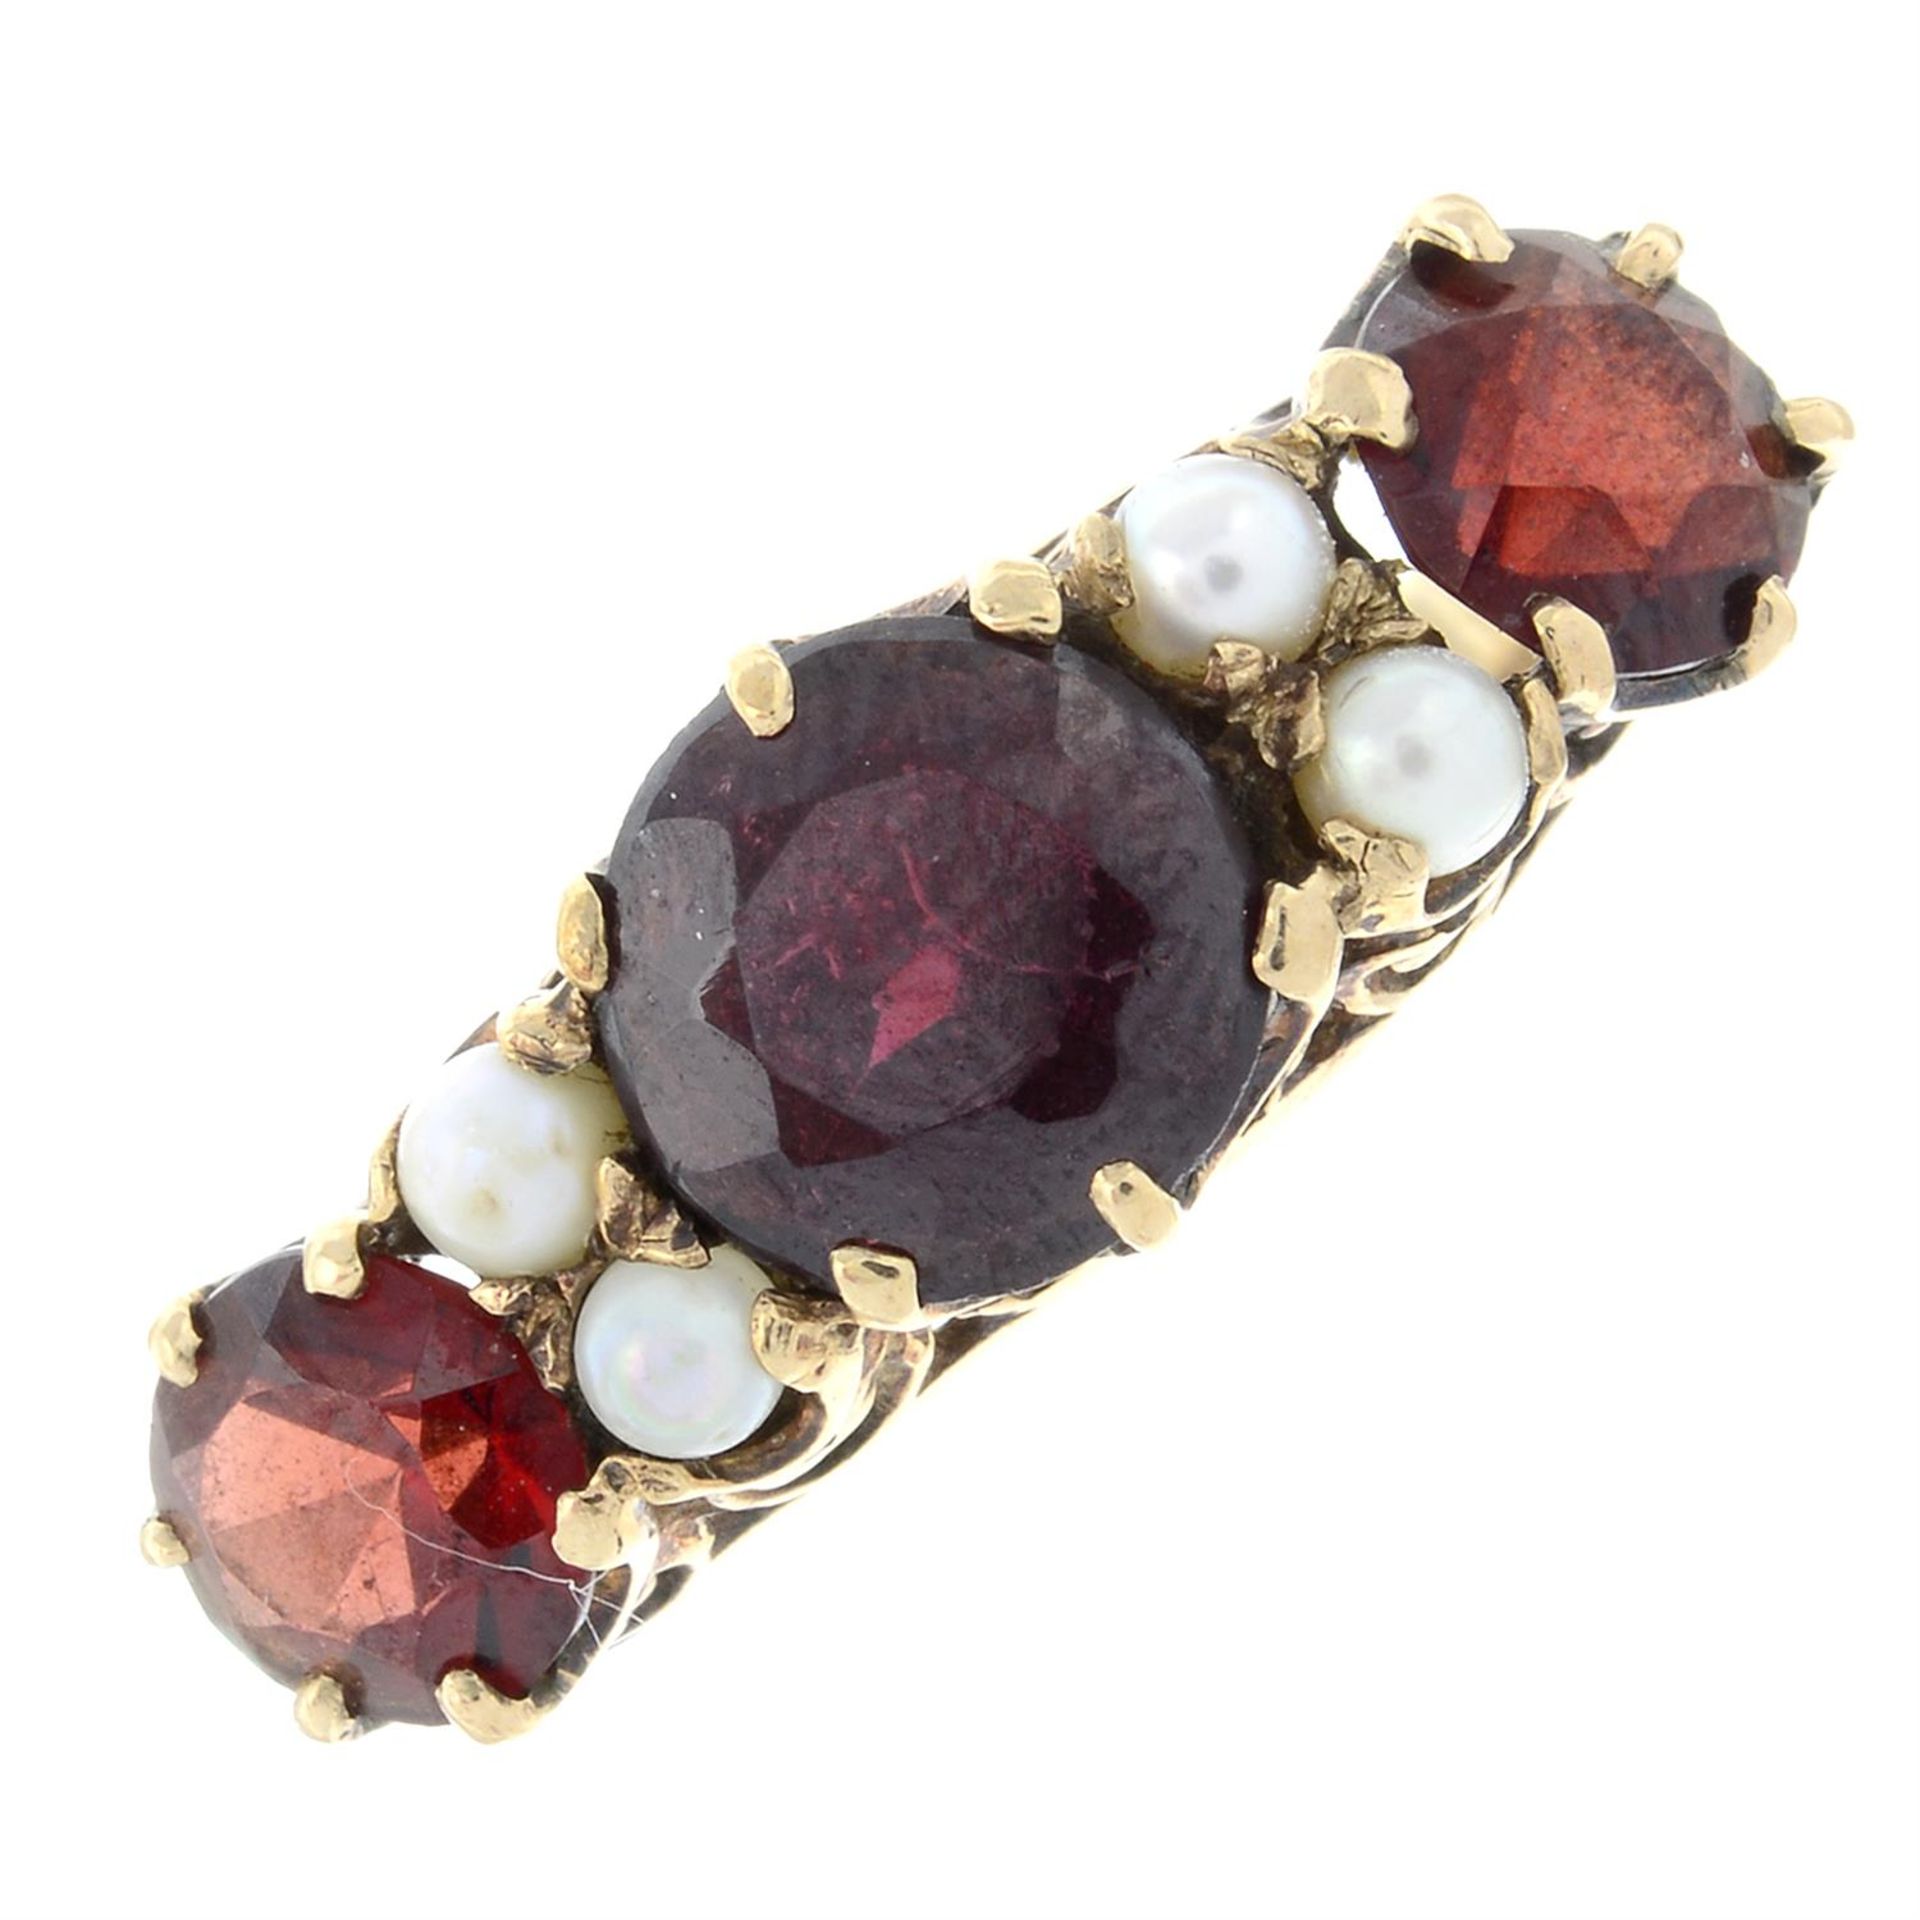 A 1960's 9ct gold garnet three-stone ring, with seed pearl spacers.